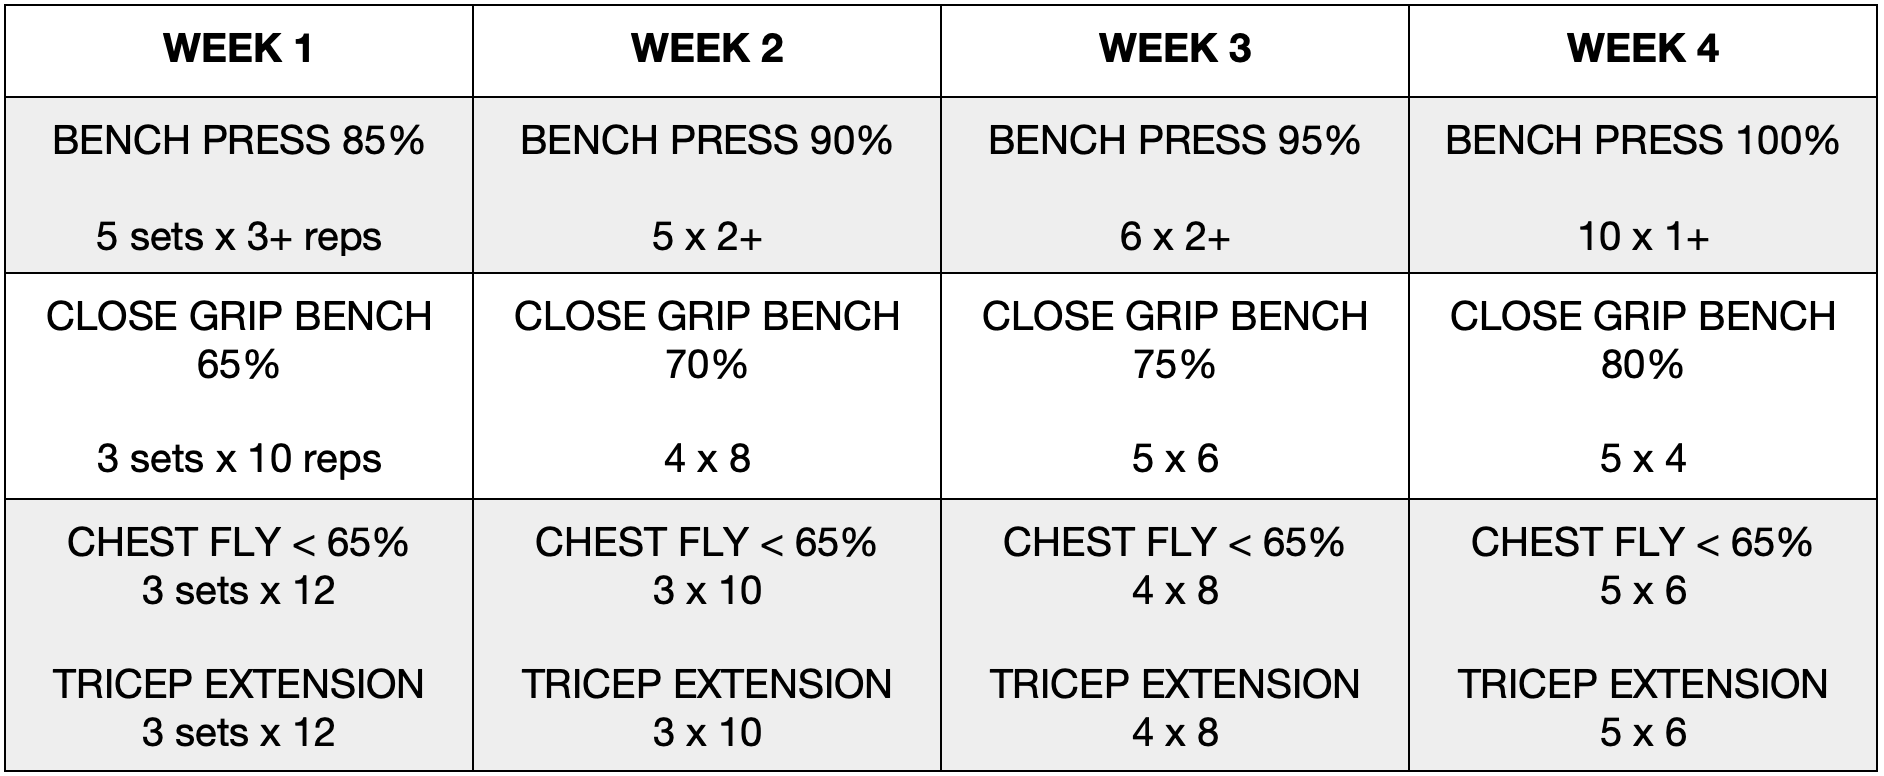 Sample 4-week progression of the bench press as the desire T1 main compound movement in GZCLP